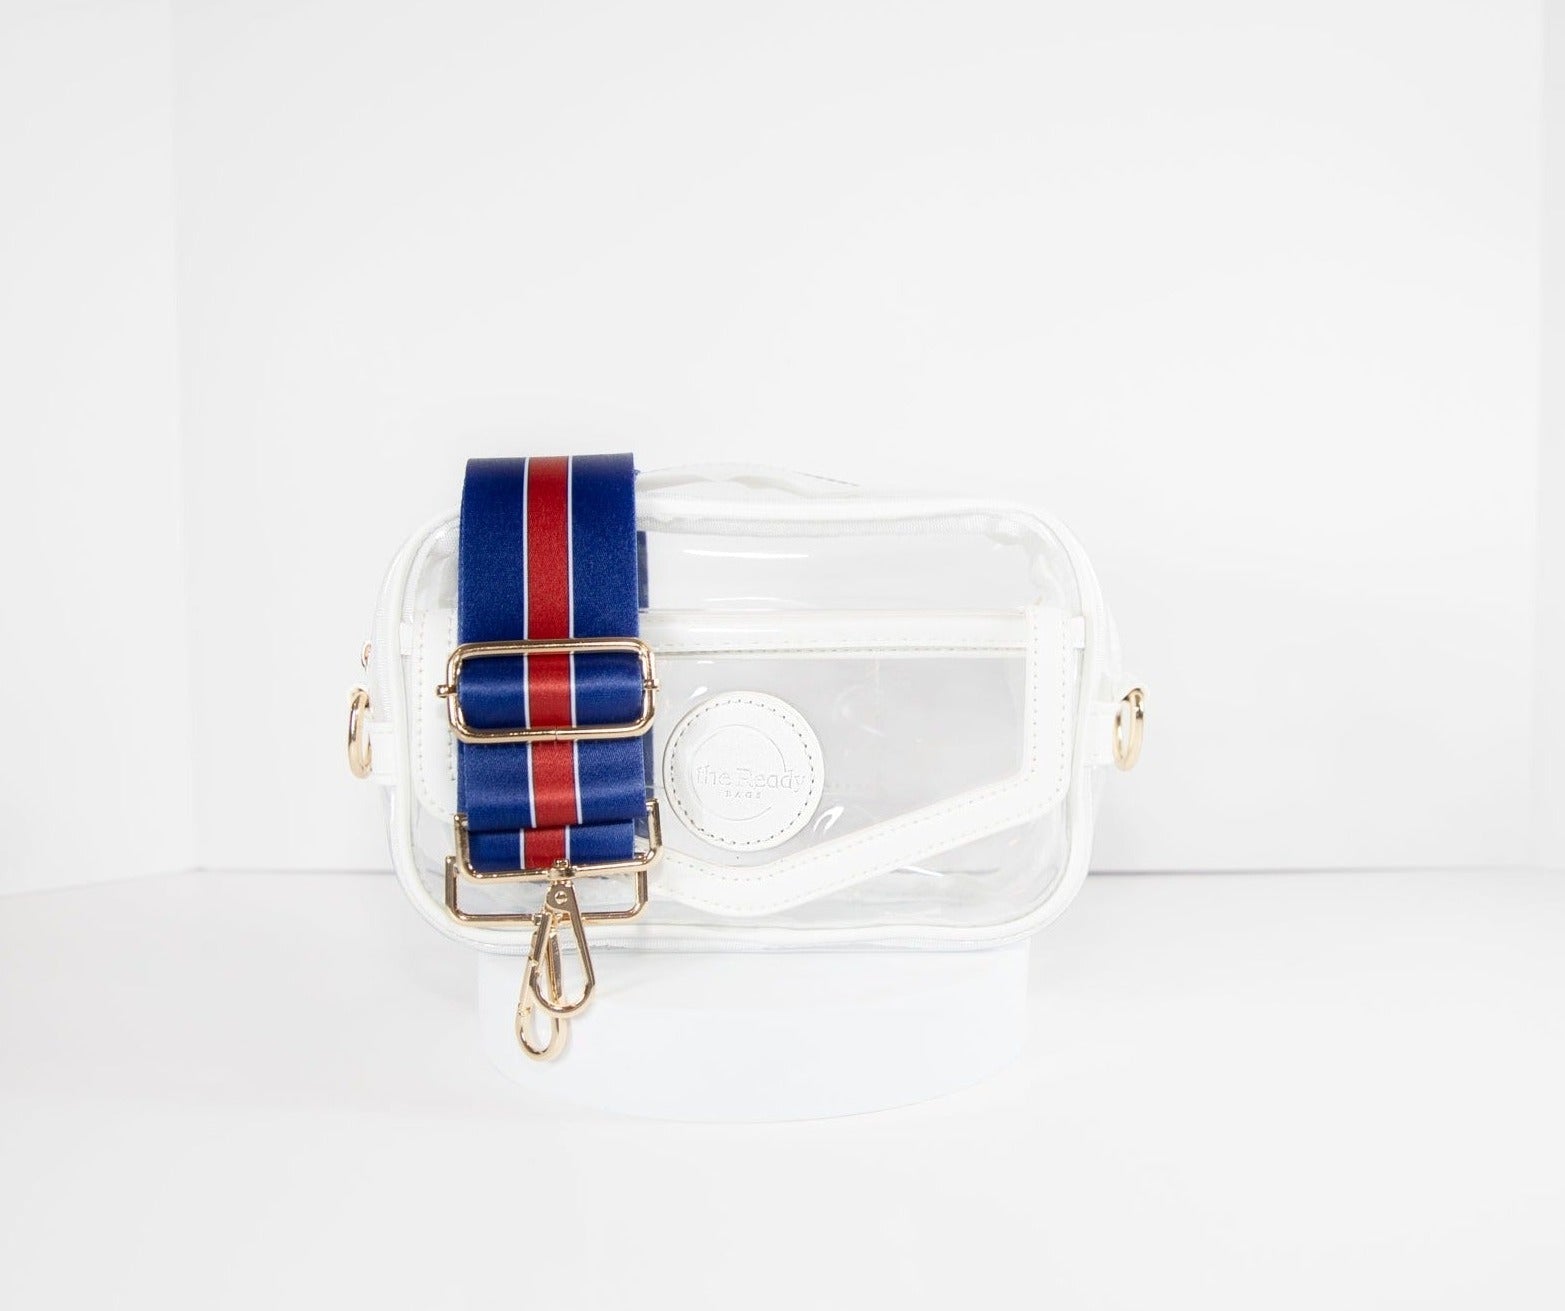 Clear Stadium Bag with white leather trim, front facing, with a crossbody strap in the colors of the New York Giants.